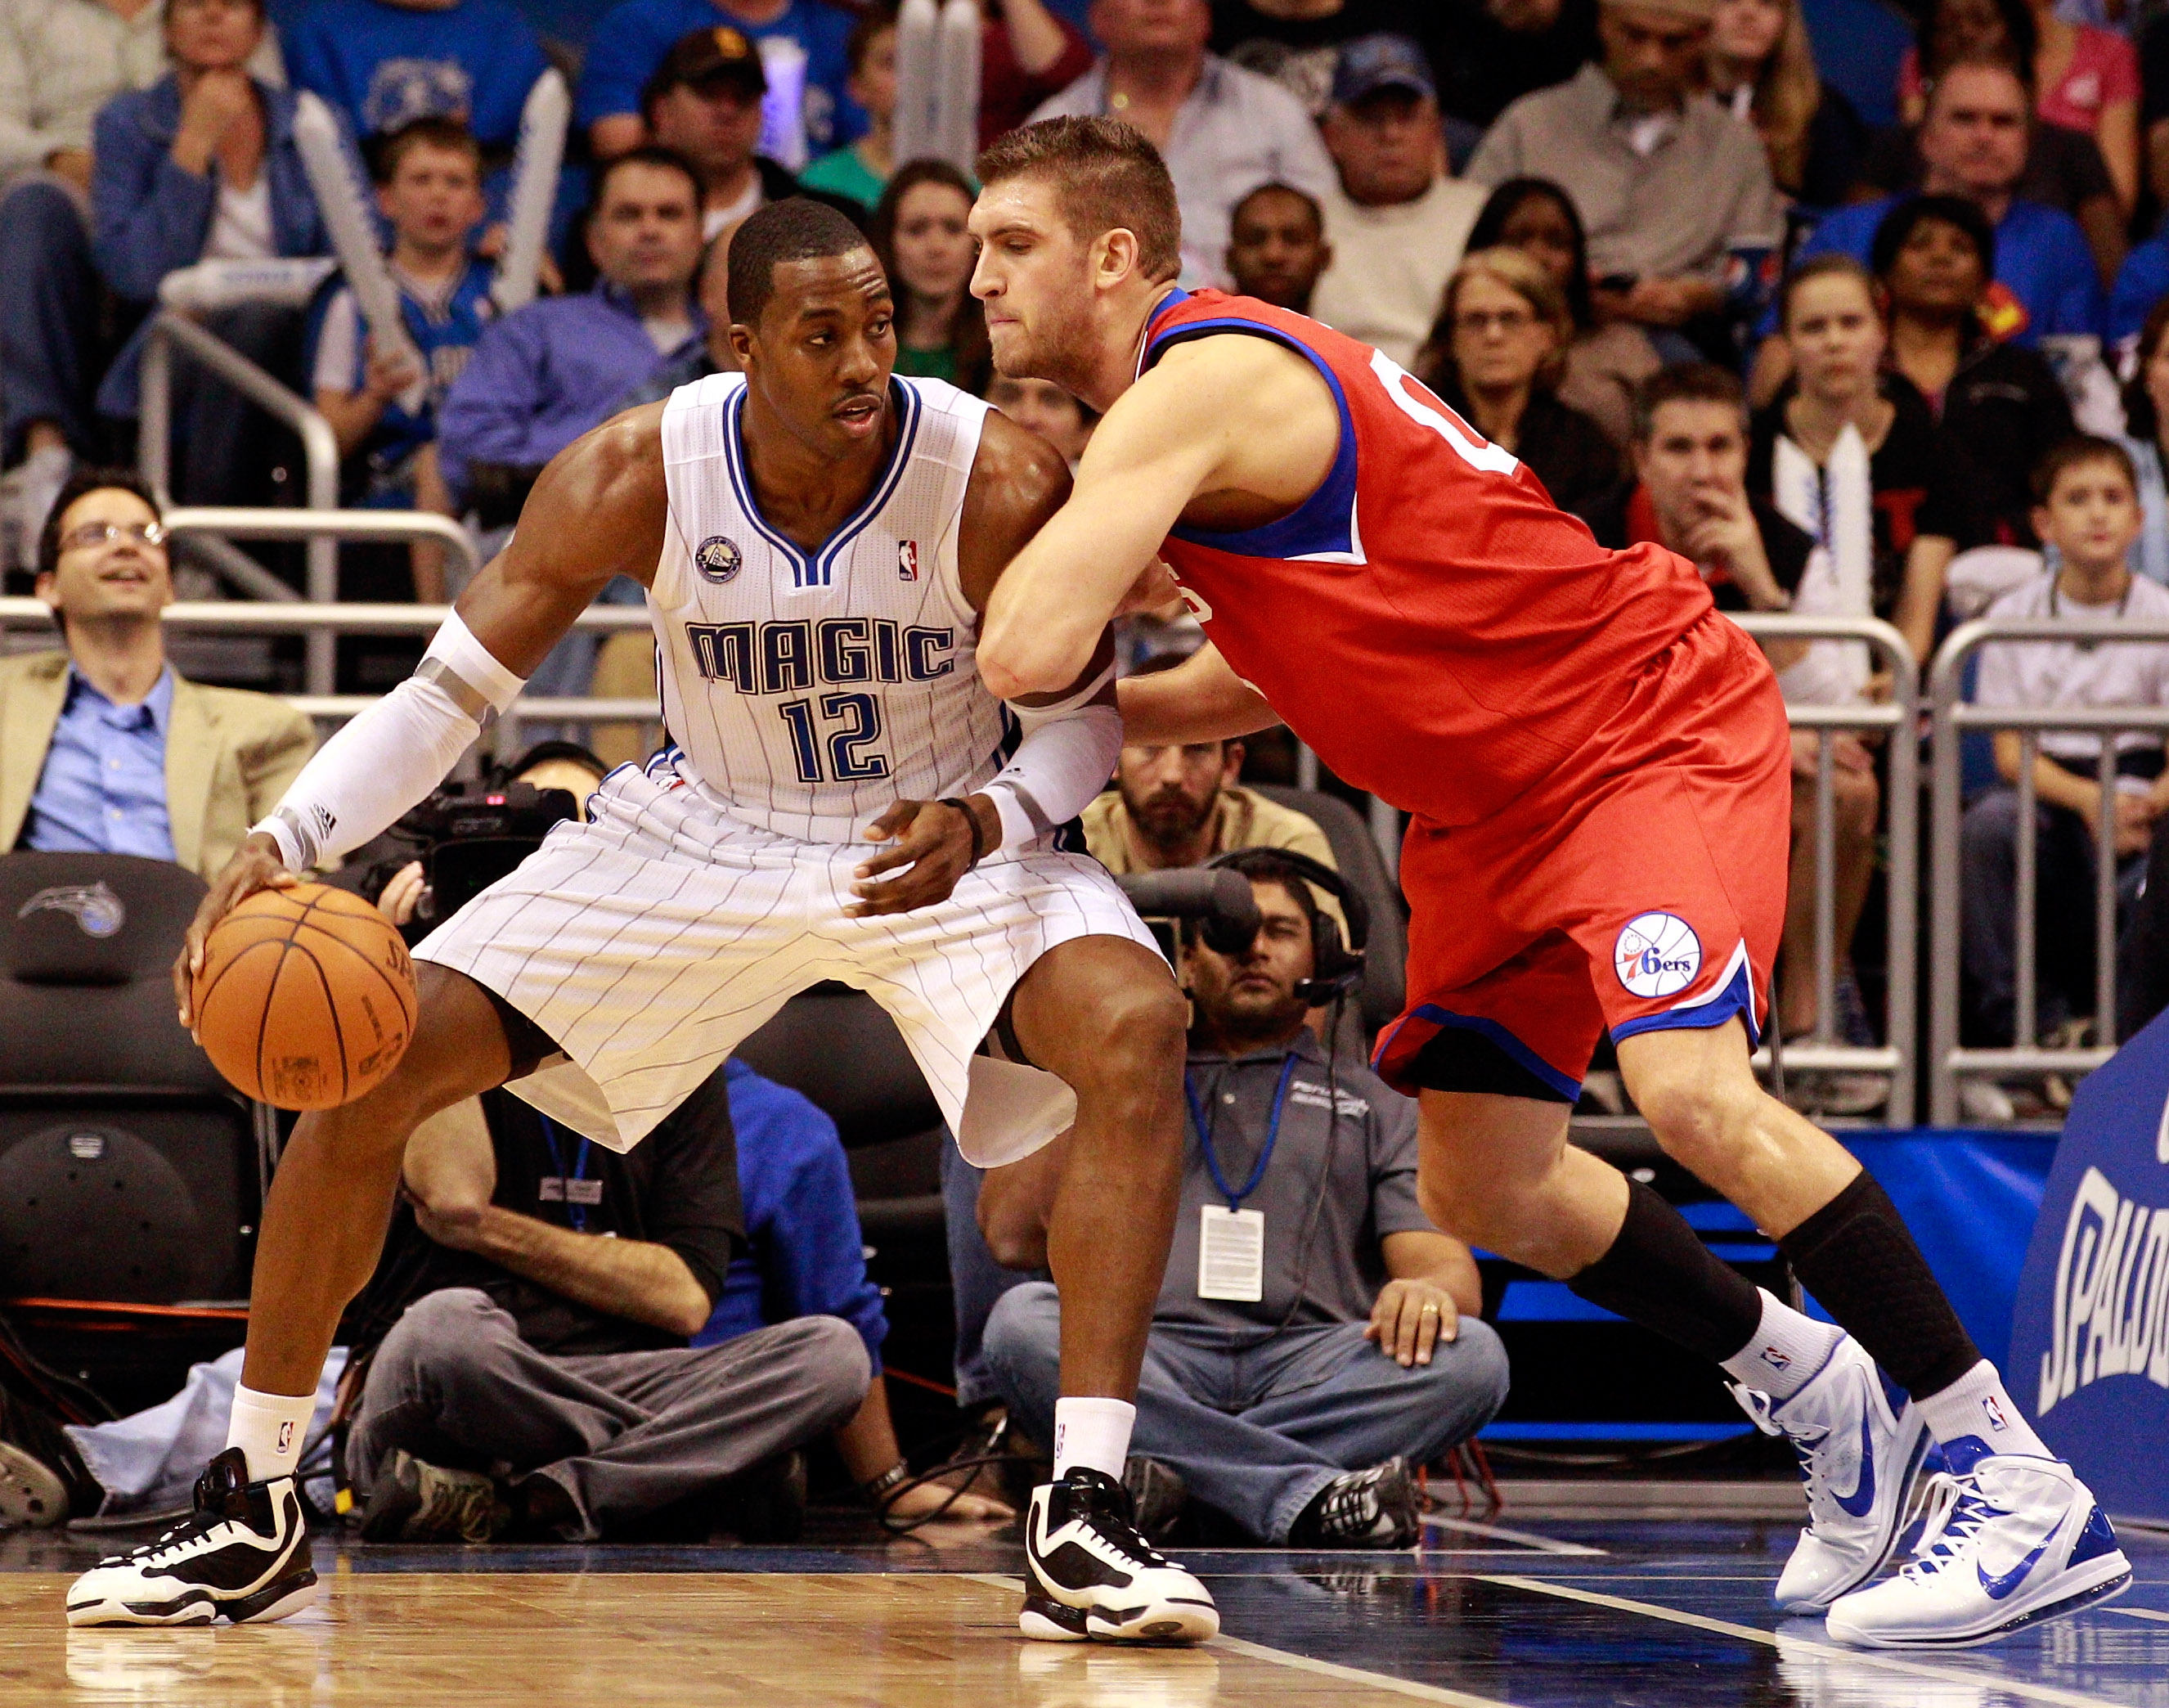 All-Star Weekend focus is on Dwight Howard, Magic